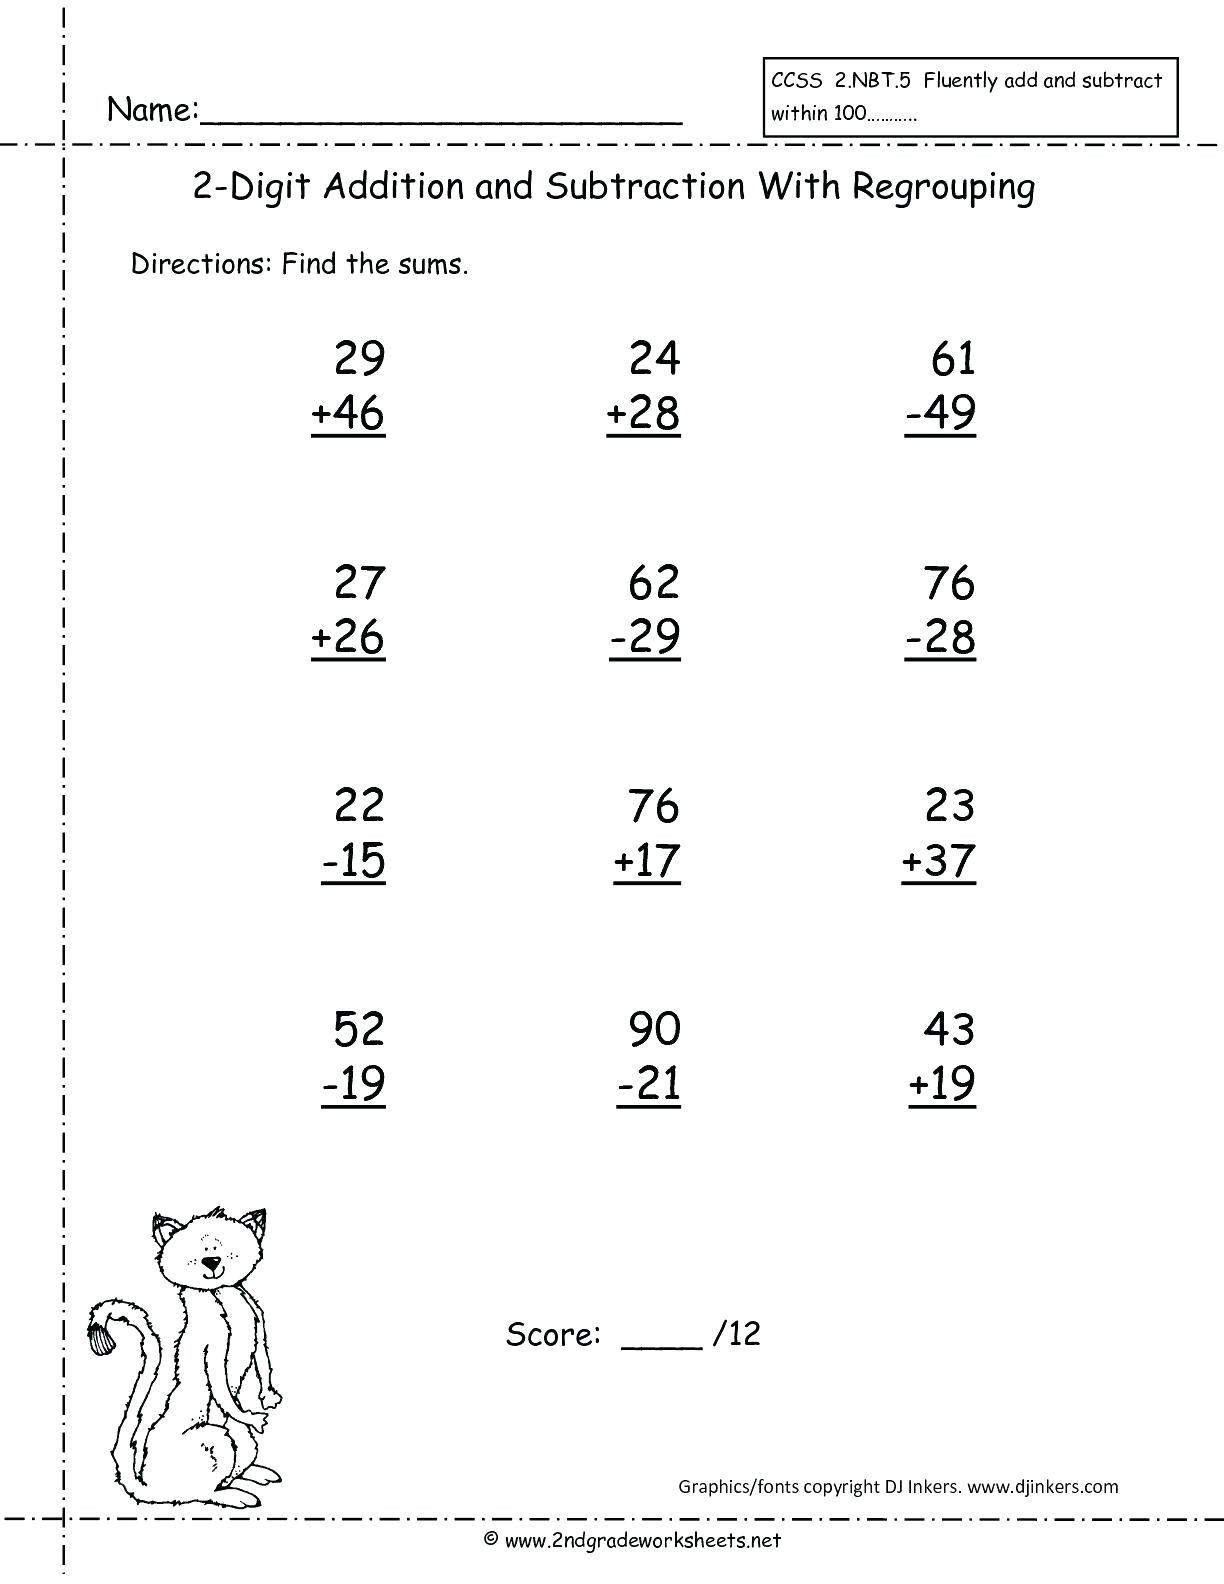 Free Math Worksheets Third Grade 3 Addition Add 2 Digit Numbers In Columns No Regrouping